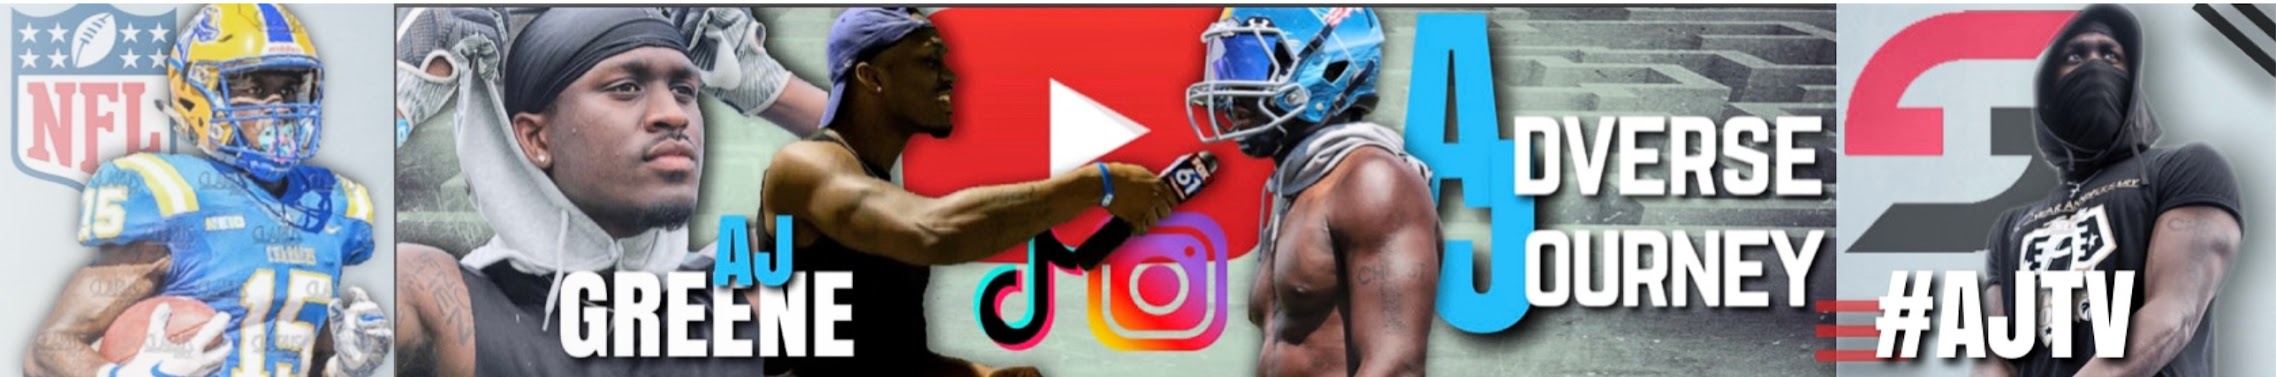 How New Haven's AJ Greene became famous on TikTok